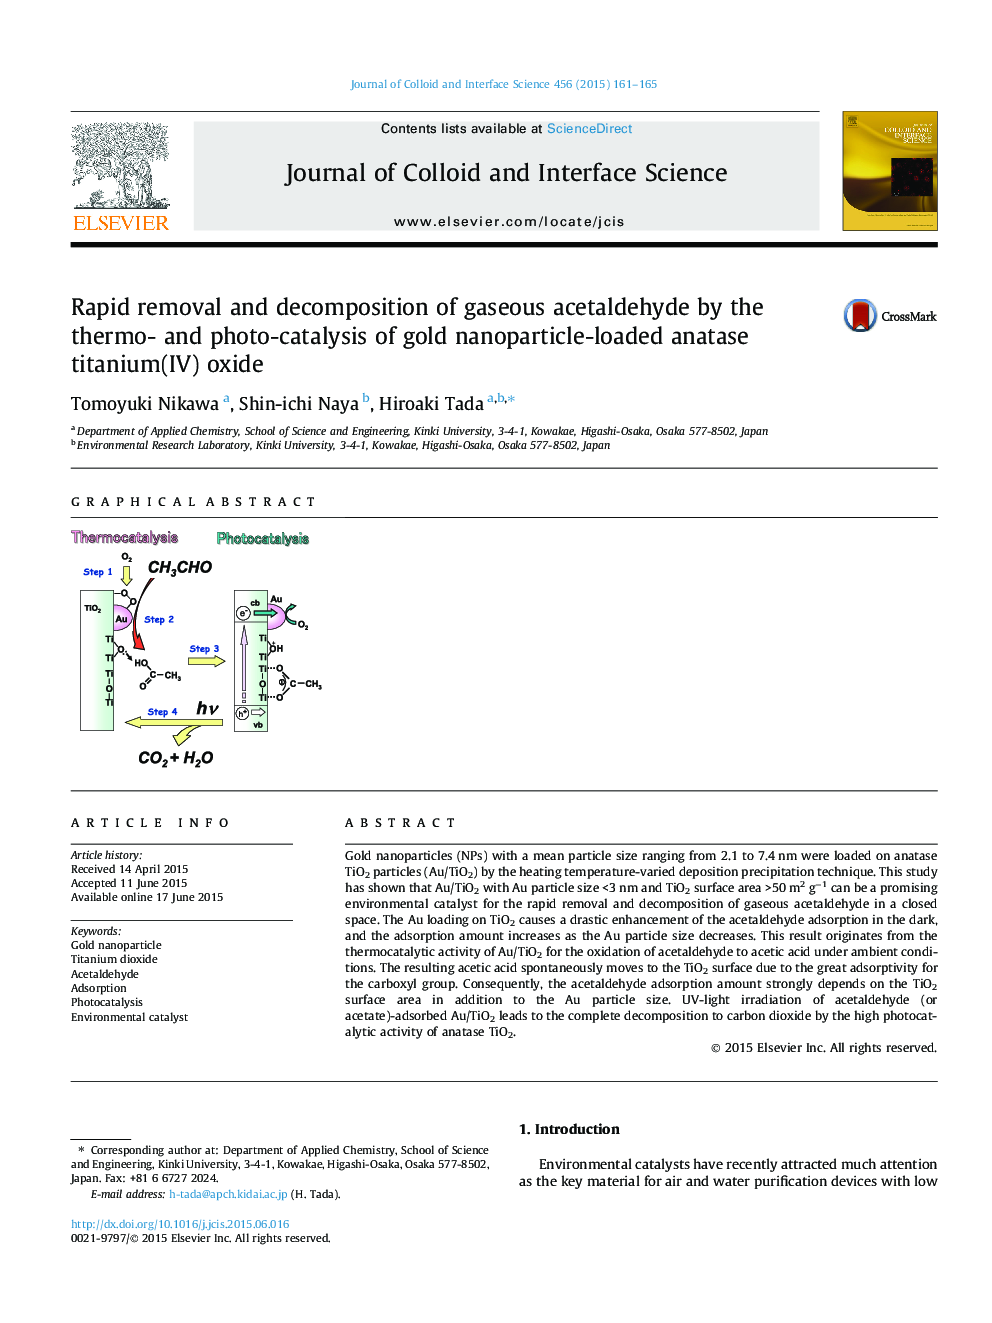 Rapid removal and decomposition of gaseous acetaldehyde by the thermo- and photo-catalysis of gold nanoparticle-loaded anatase titanium(IV) oxide